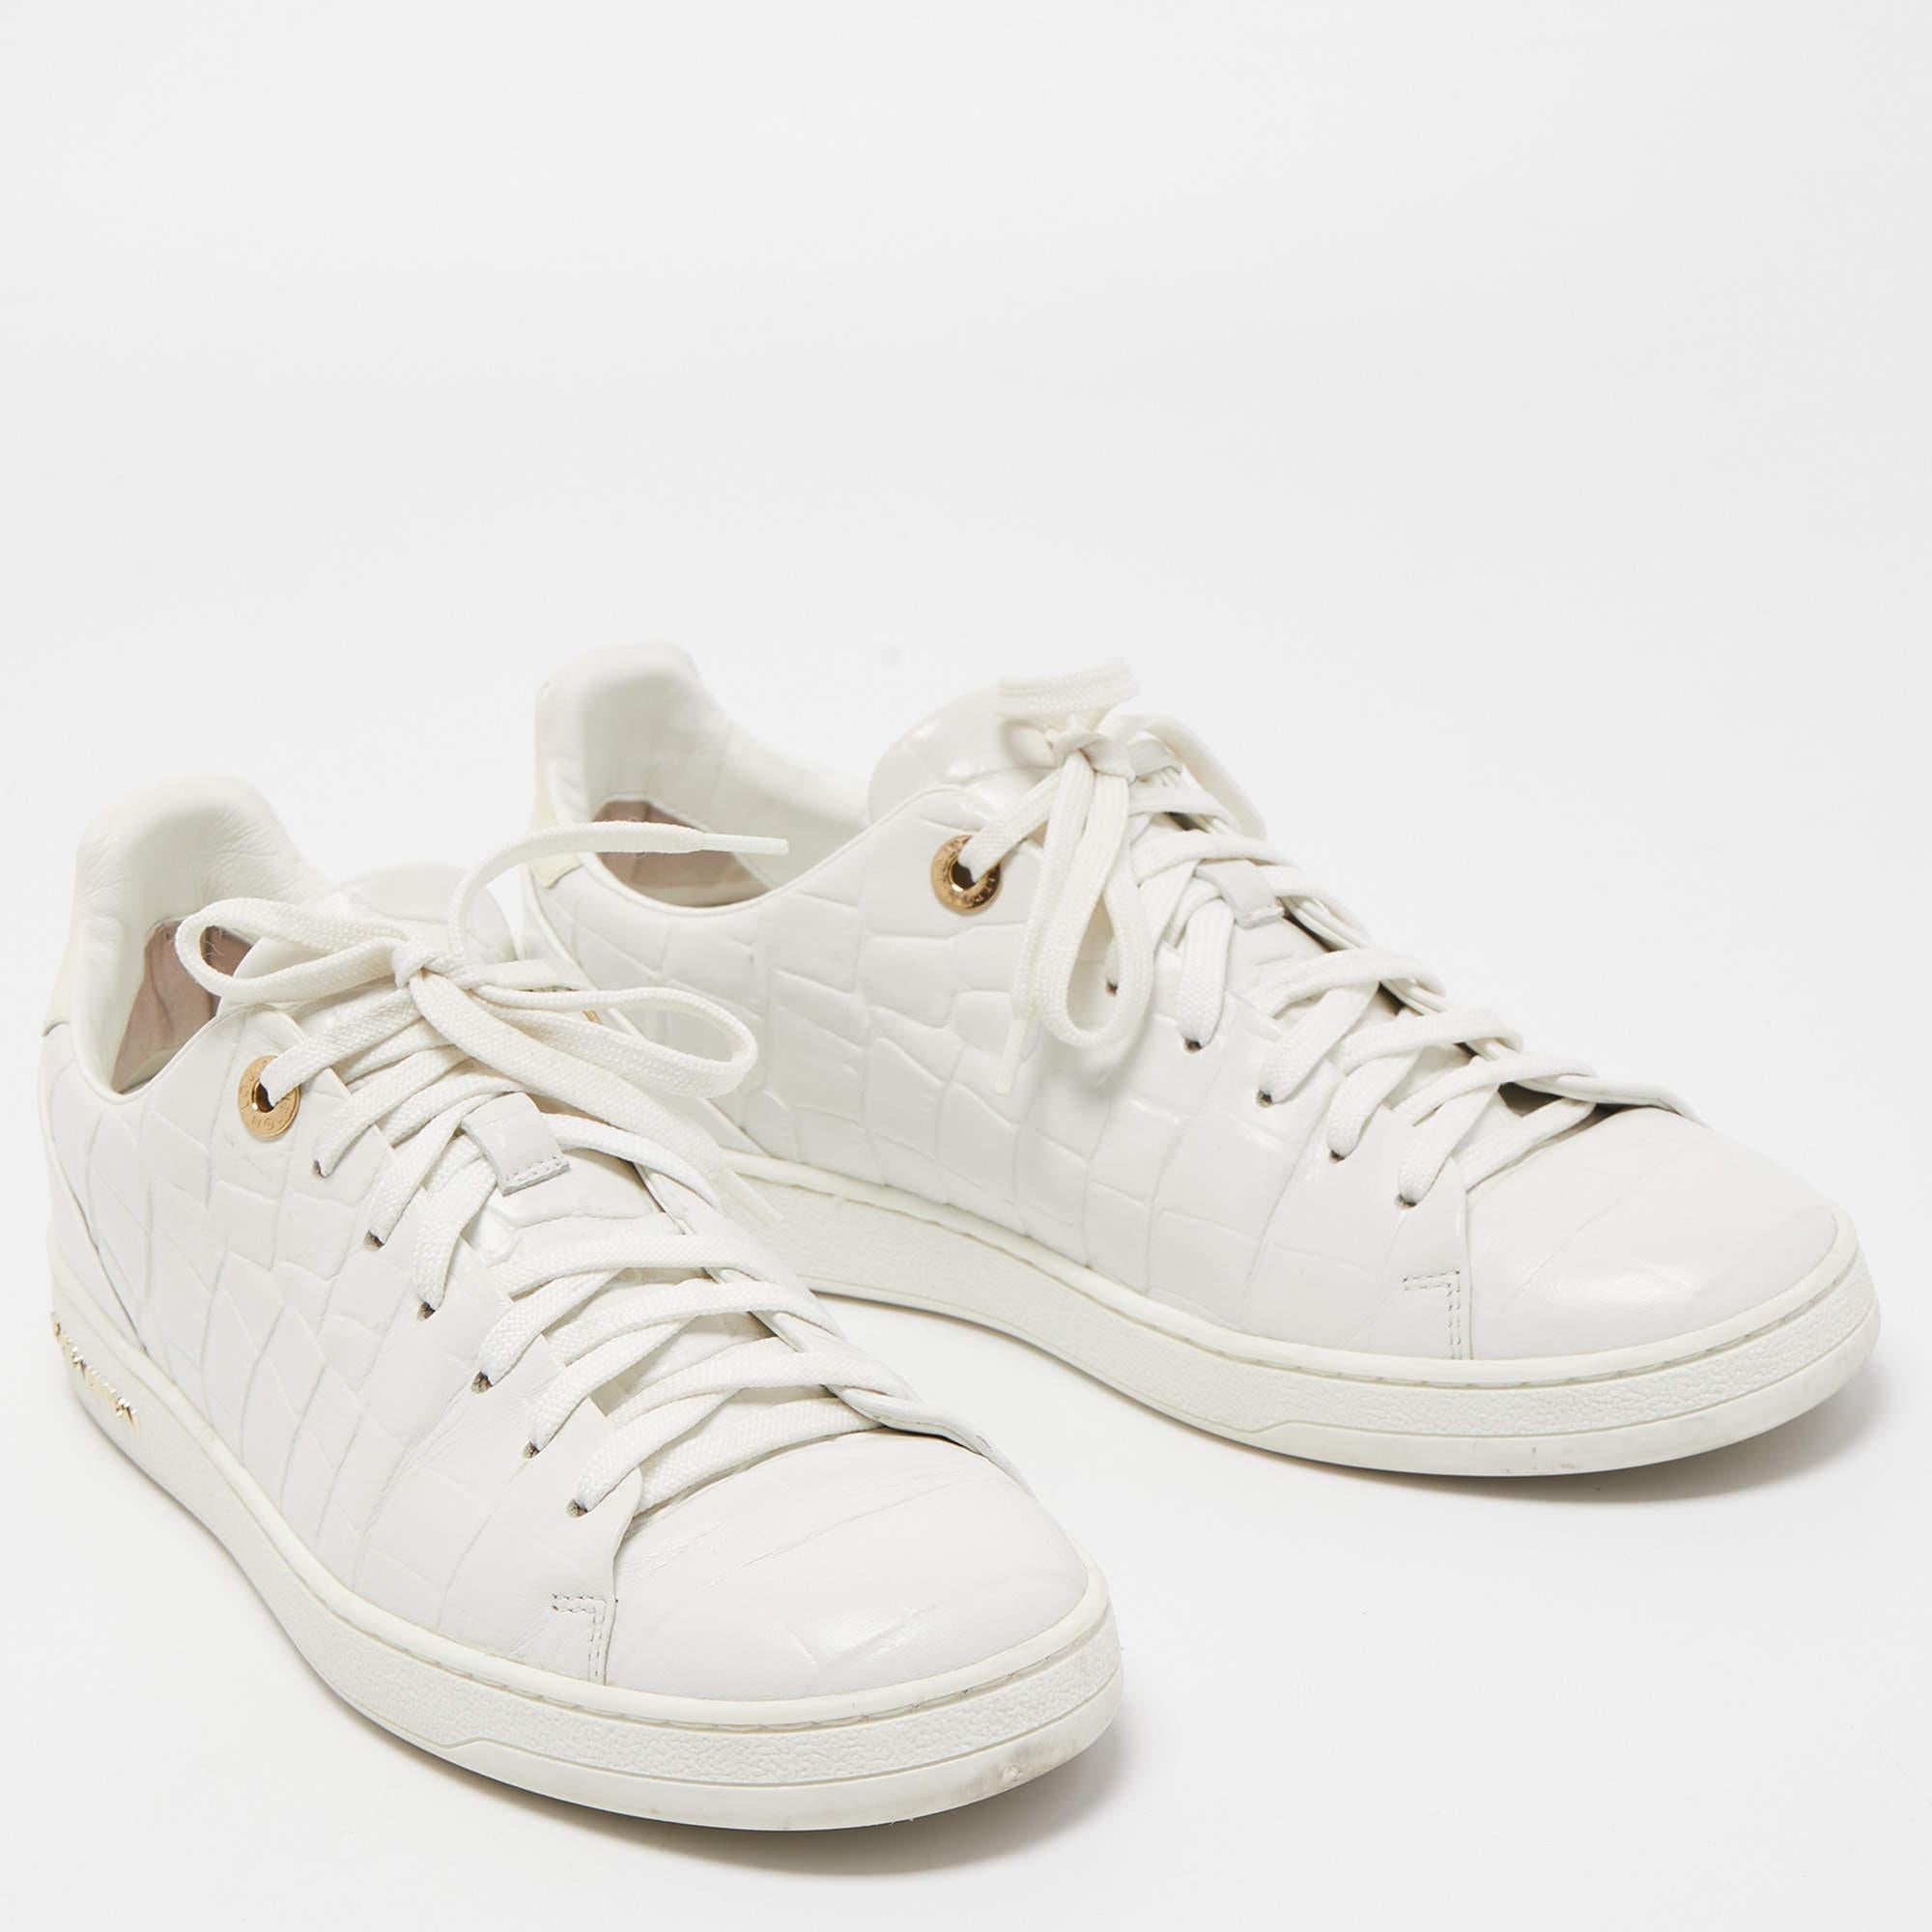 Women's Louis Vuitton White Croc Embossed Leather Frontrow Sneakers Size 38.5